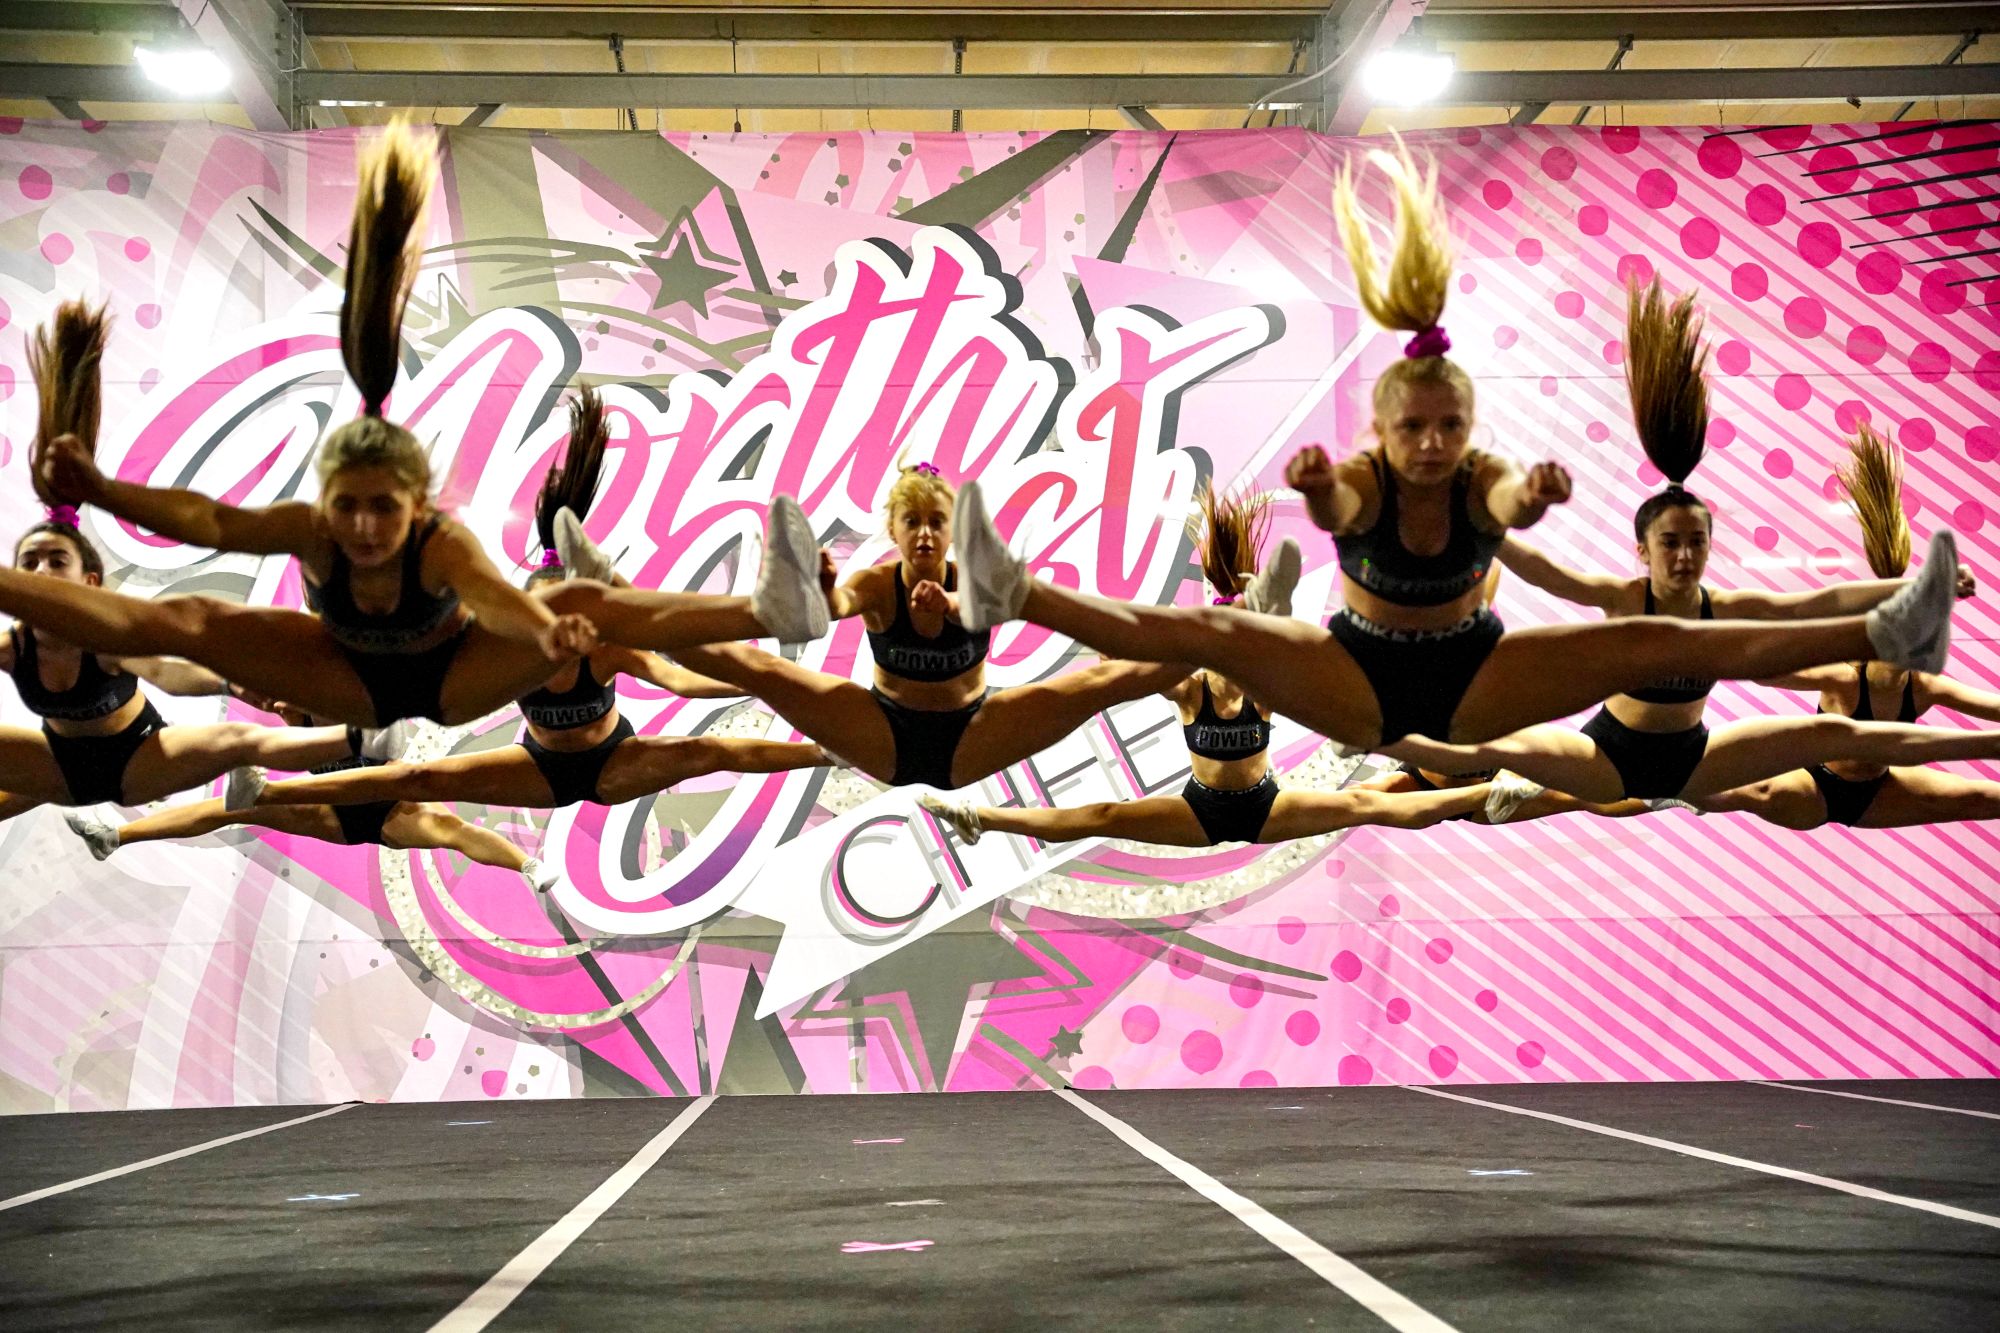 A group of girls all doing split jumps at the same time.